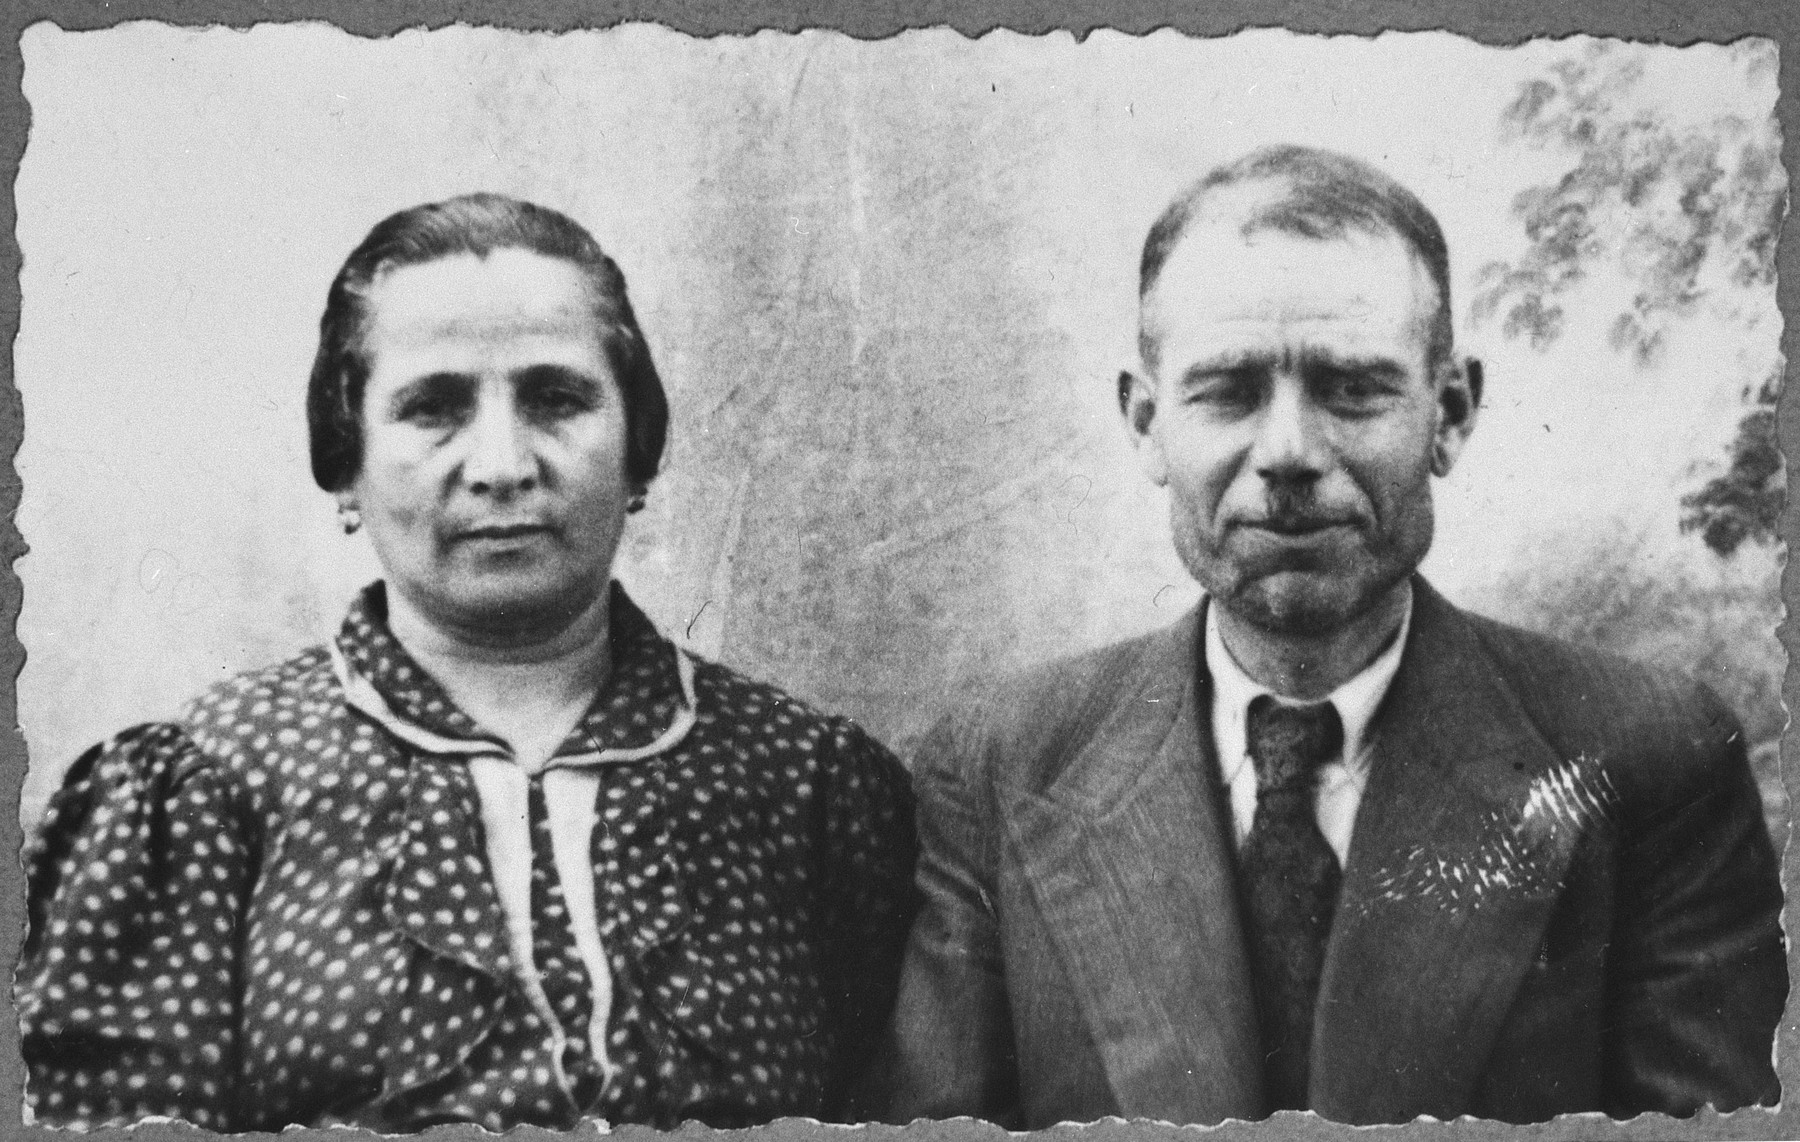 Portrait of Schachia Ischach and his wife, Hana.  They lived at Zvornitska 11 in Bitola.